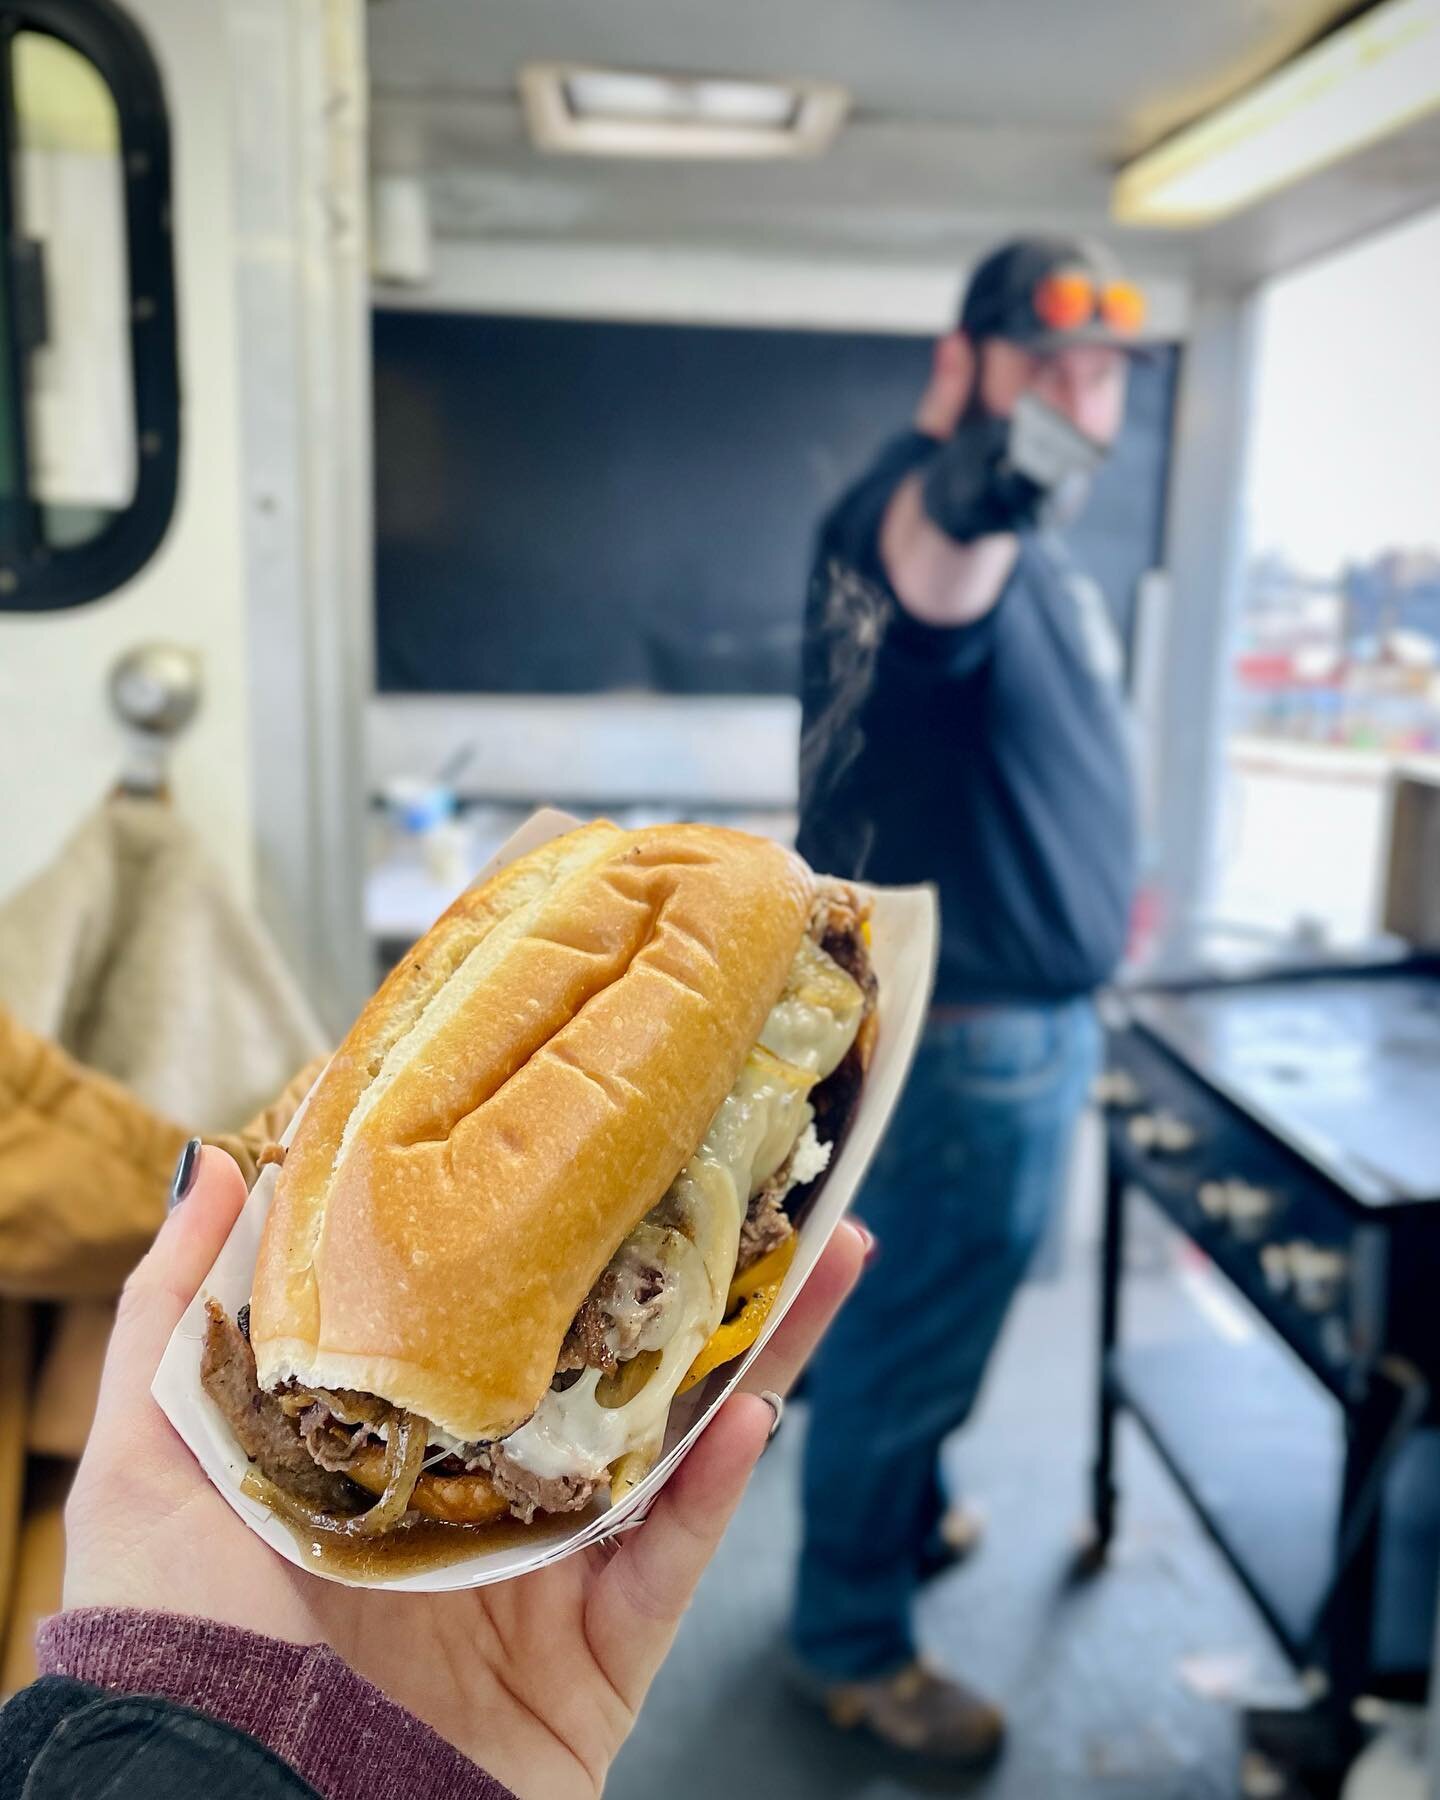 It&rsquo;s your LAST day for Shawnanigans Cheesesteaks in 2022!! 

11-5pm at Two Bear Arms

Plus, they&rsquo;re giving free pistol range passes for anyone who eats at the food truck today. What a deal!! 

#twobeararms #cheesesteaks #jointheherd🦬 #sh